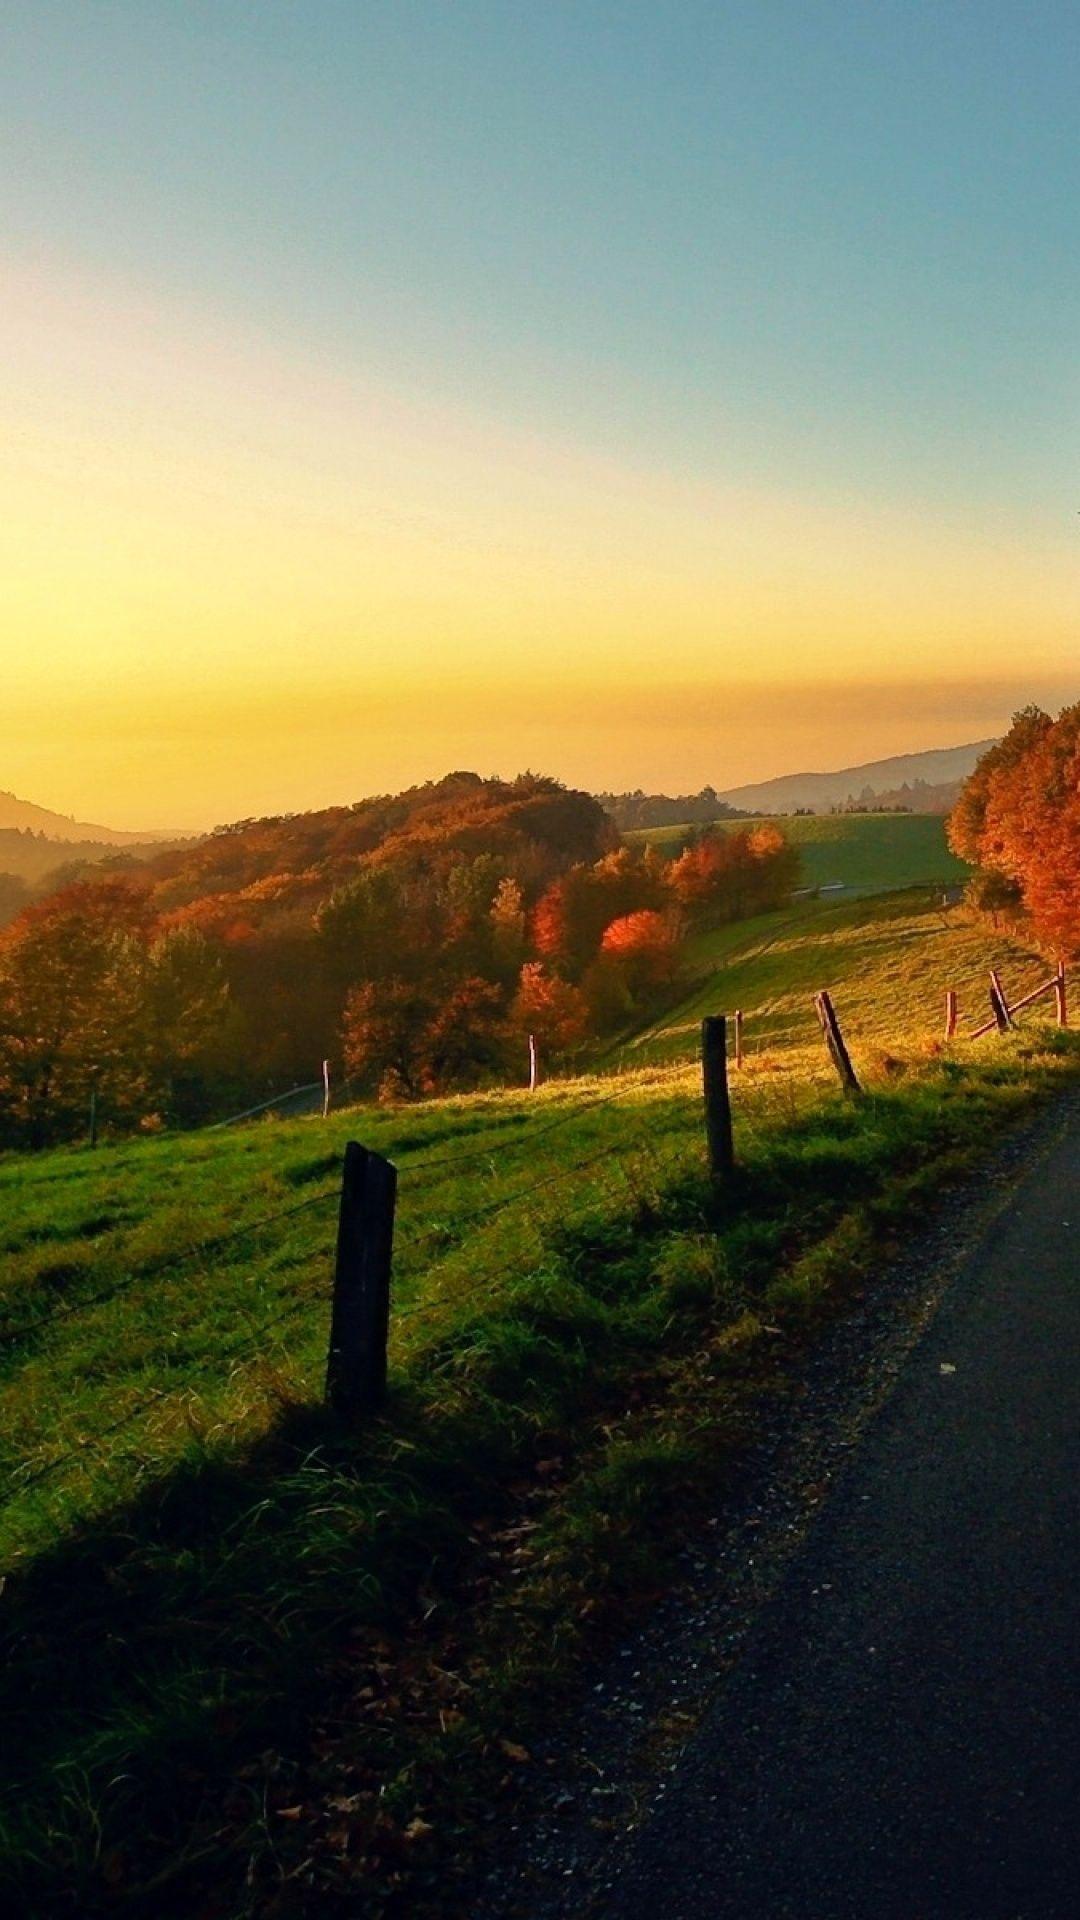 Countryside Autumn Landscape Mobile Wallpaper iPhone, Android